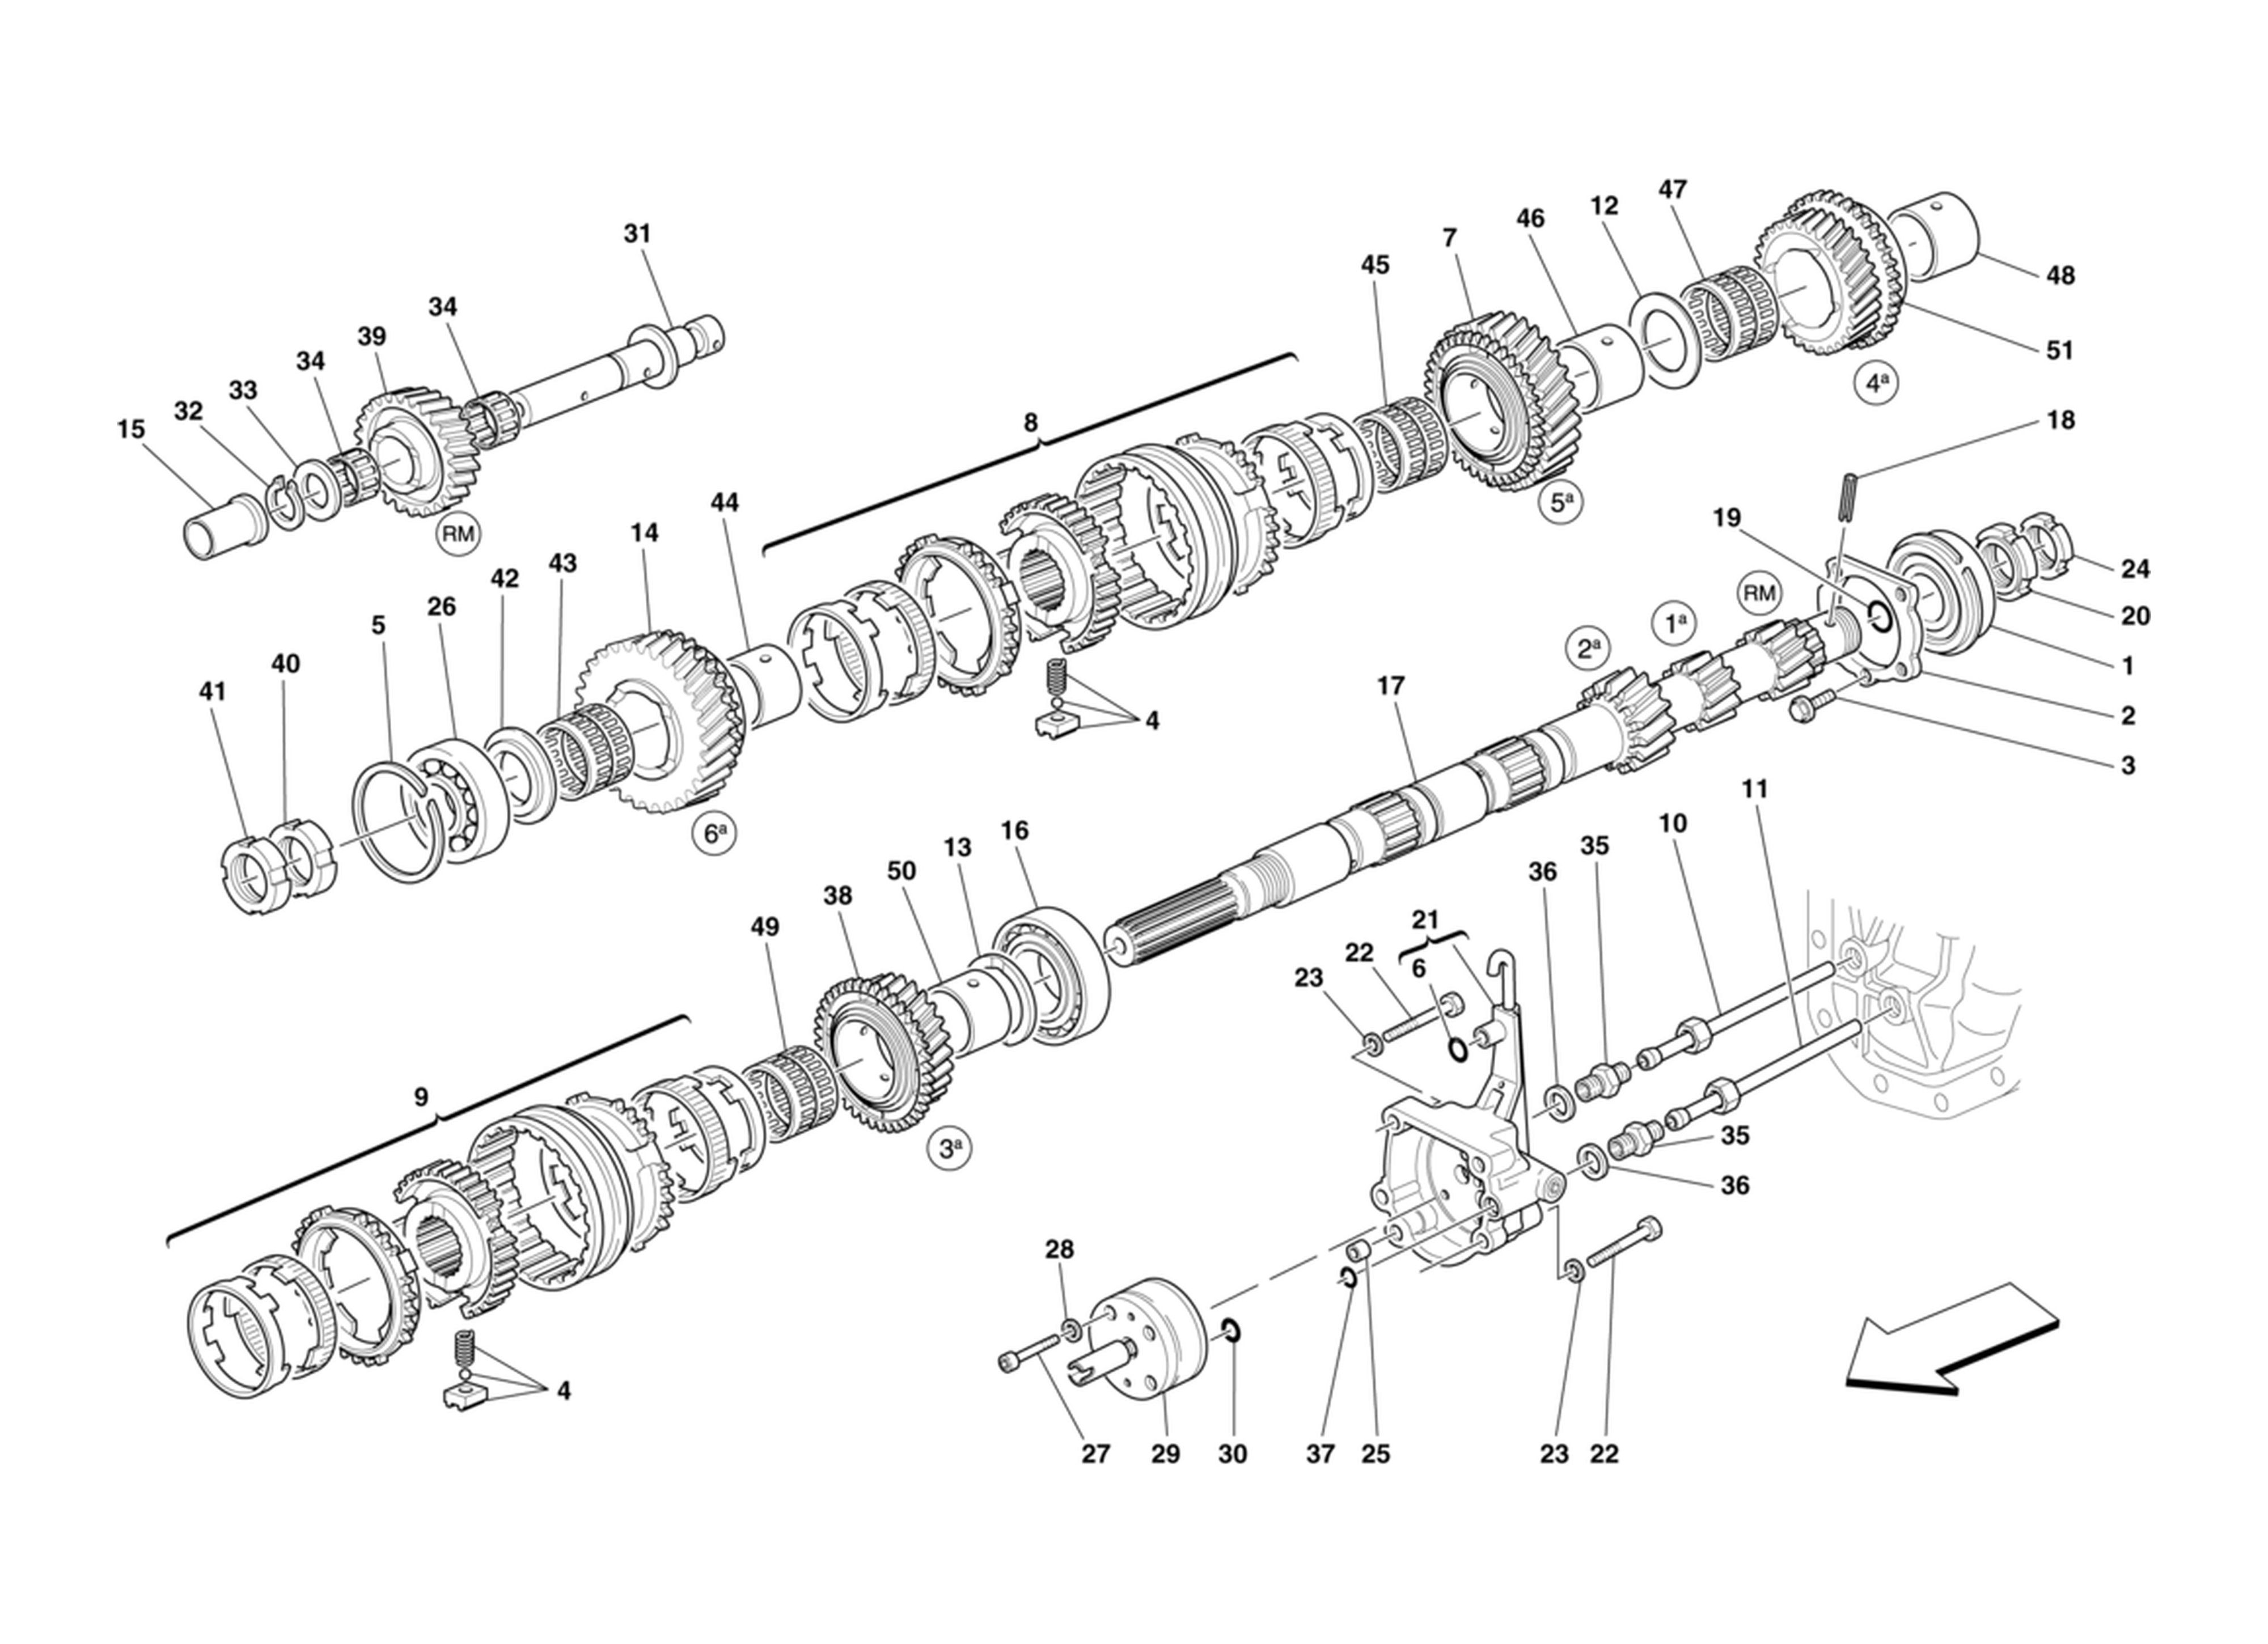 Schematic: Primary Gearbox Shaft Gears And Gearbox Oil Pump